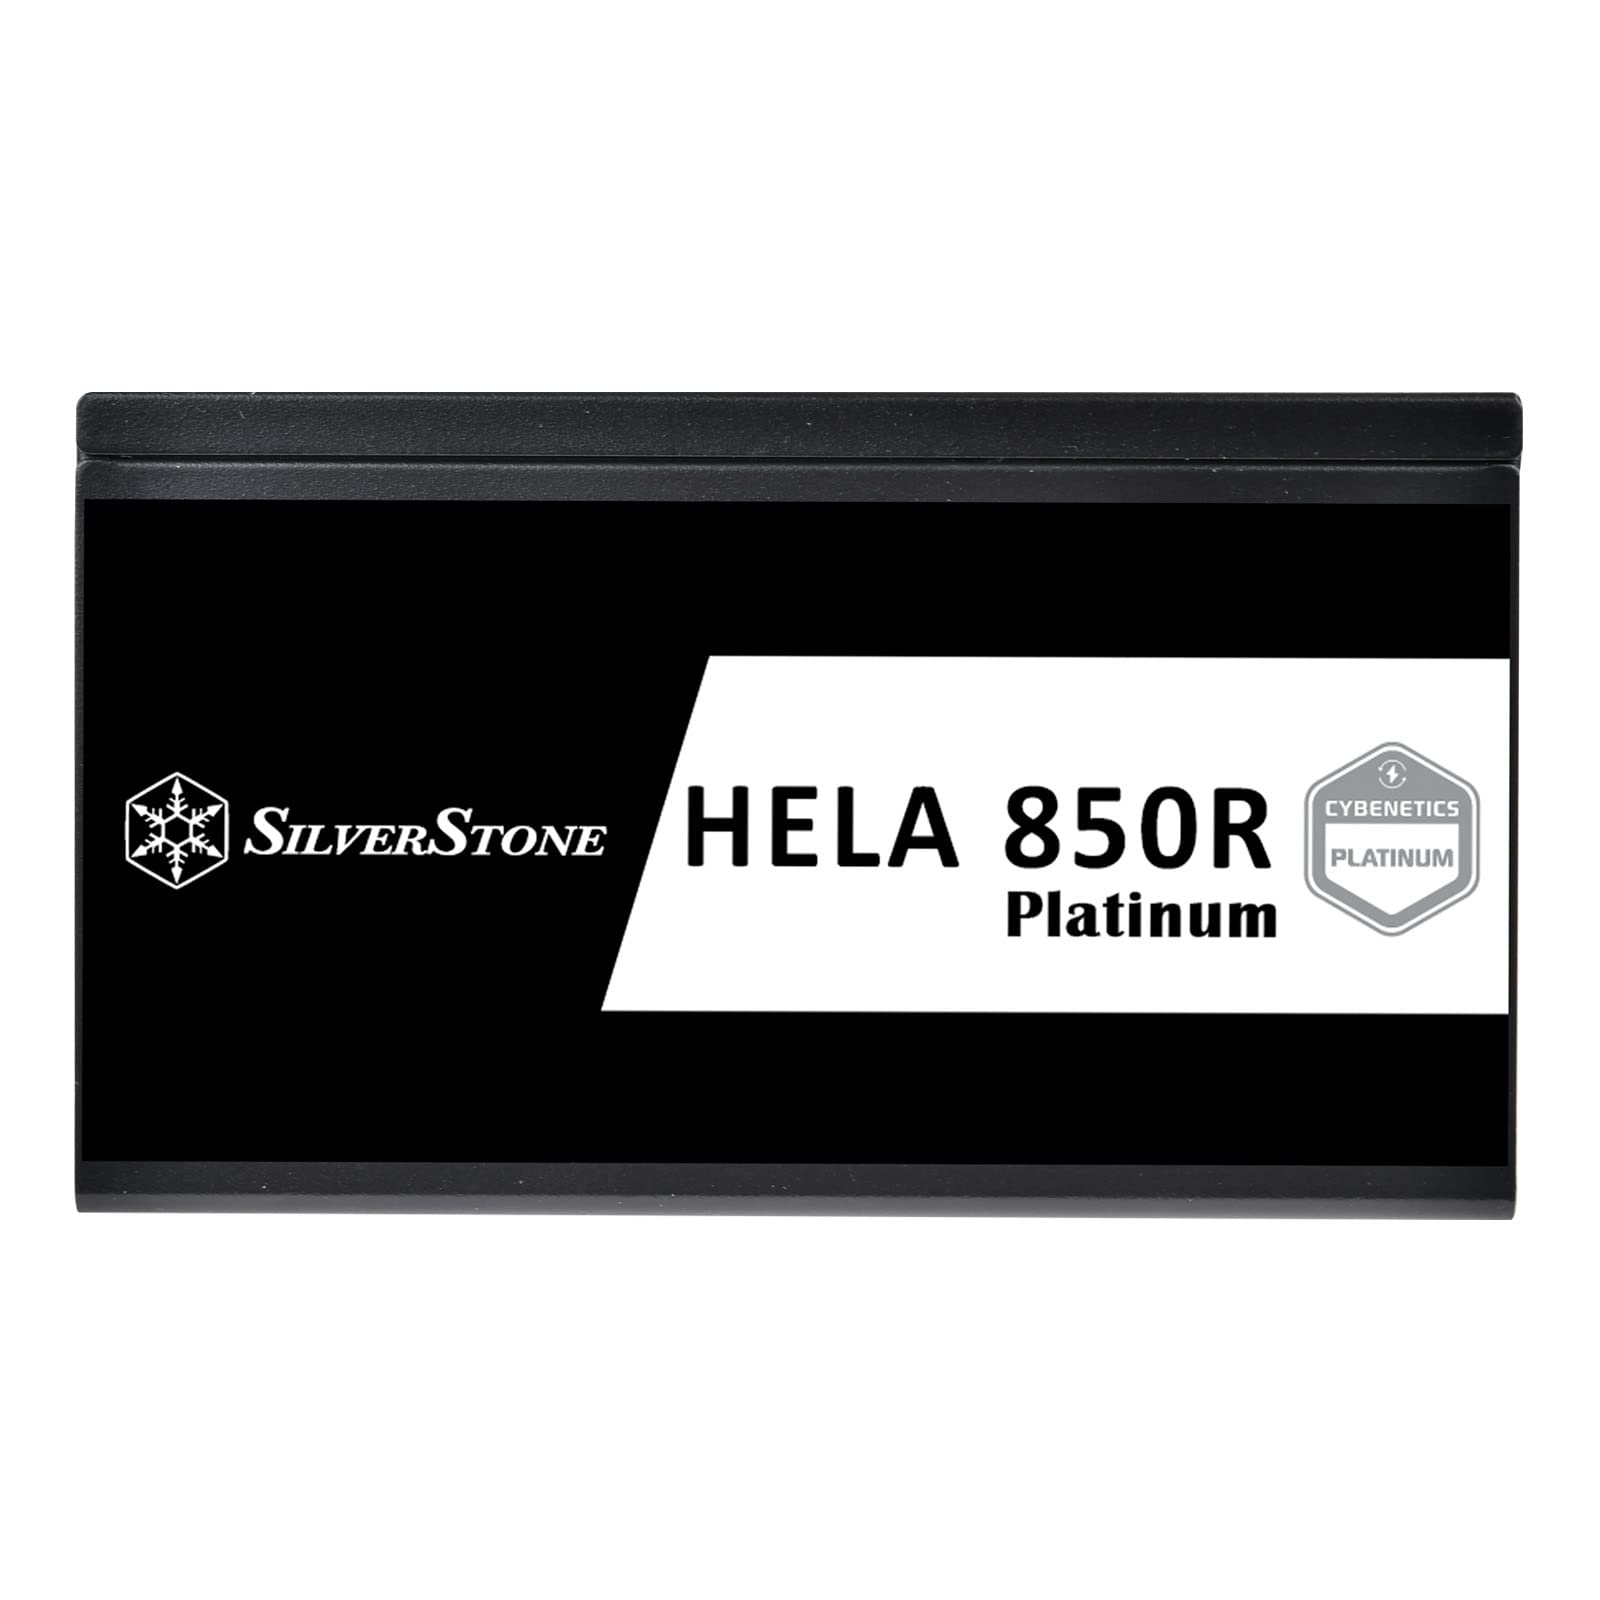 SilverStone Technology HELA 850R Platinum Cybenetics Platinum 850W PCIe 5.0 Fully Modular ATX 3.0 Power Supply with A+ Noise Rating (18dBA Average), SST-HA850R-PM